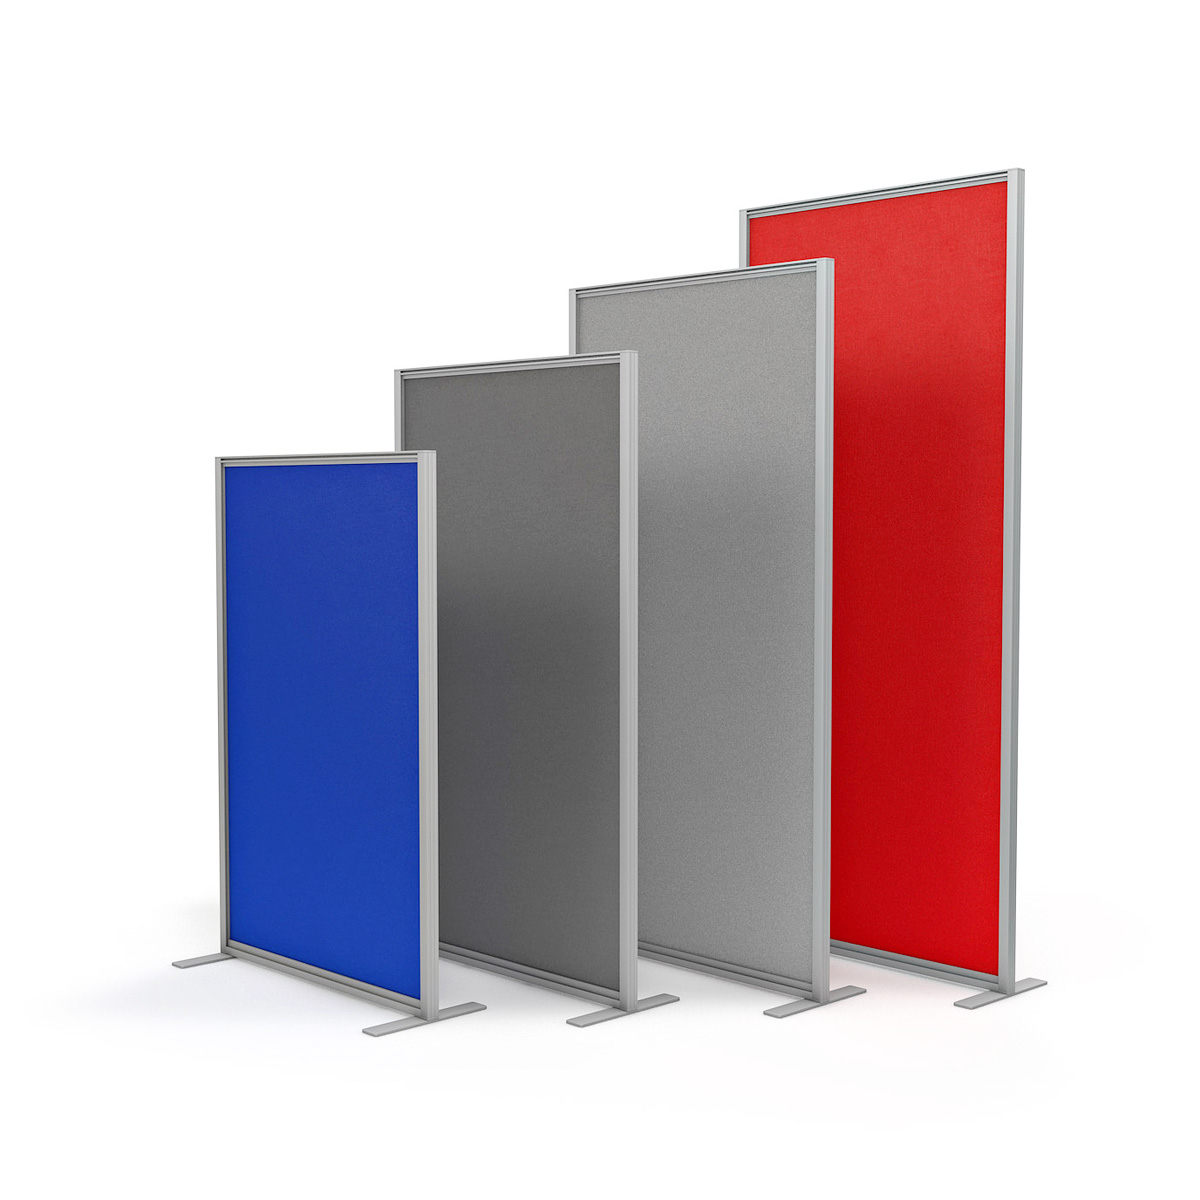 FRONTIER® Acoustic Panel Screens - Ideal For Offices And Open Plan Working Environments